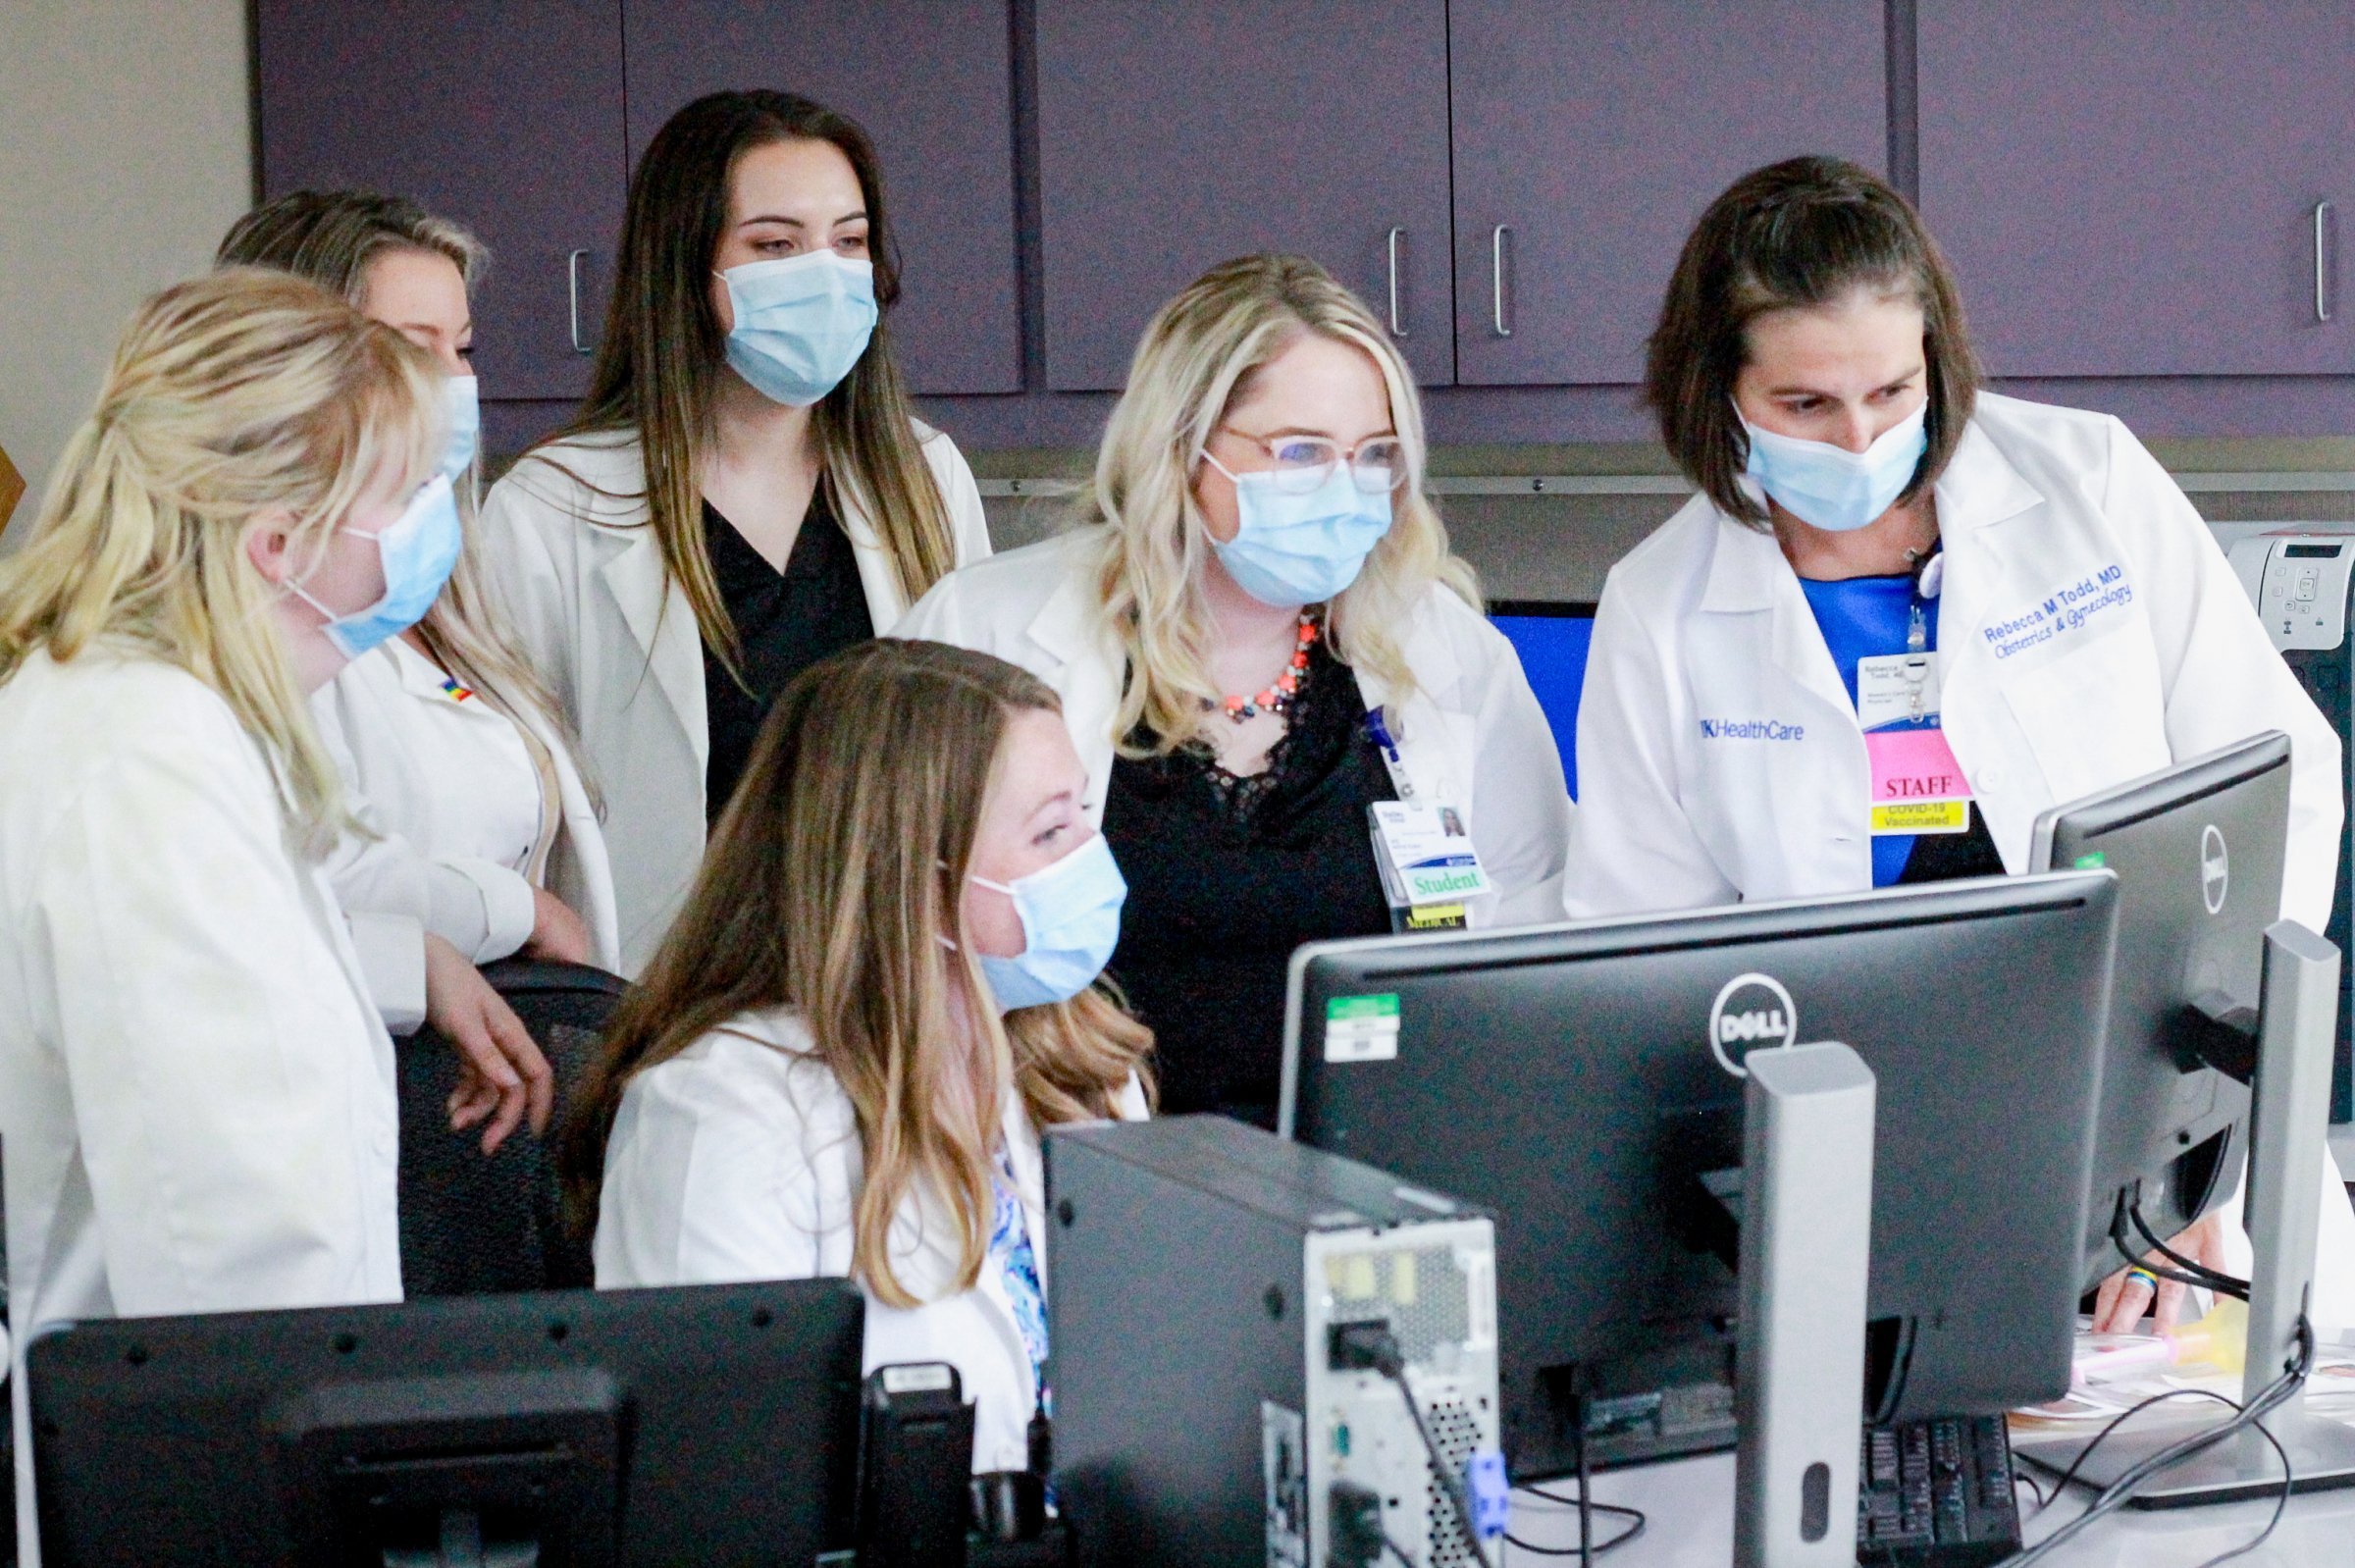 Rebecca Todd, MD with students looking at computer screen